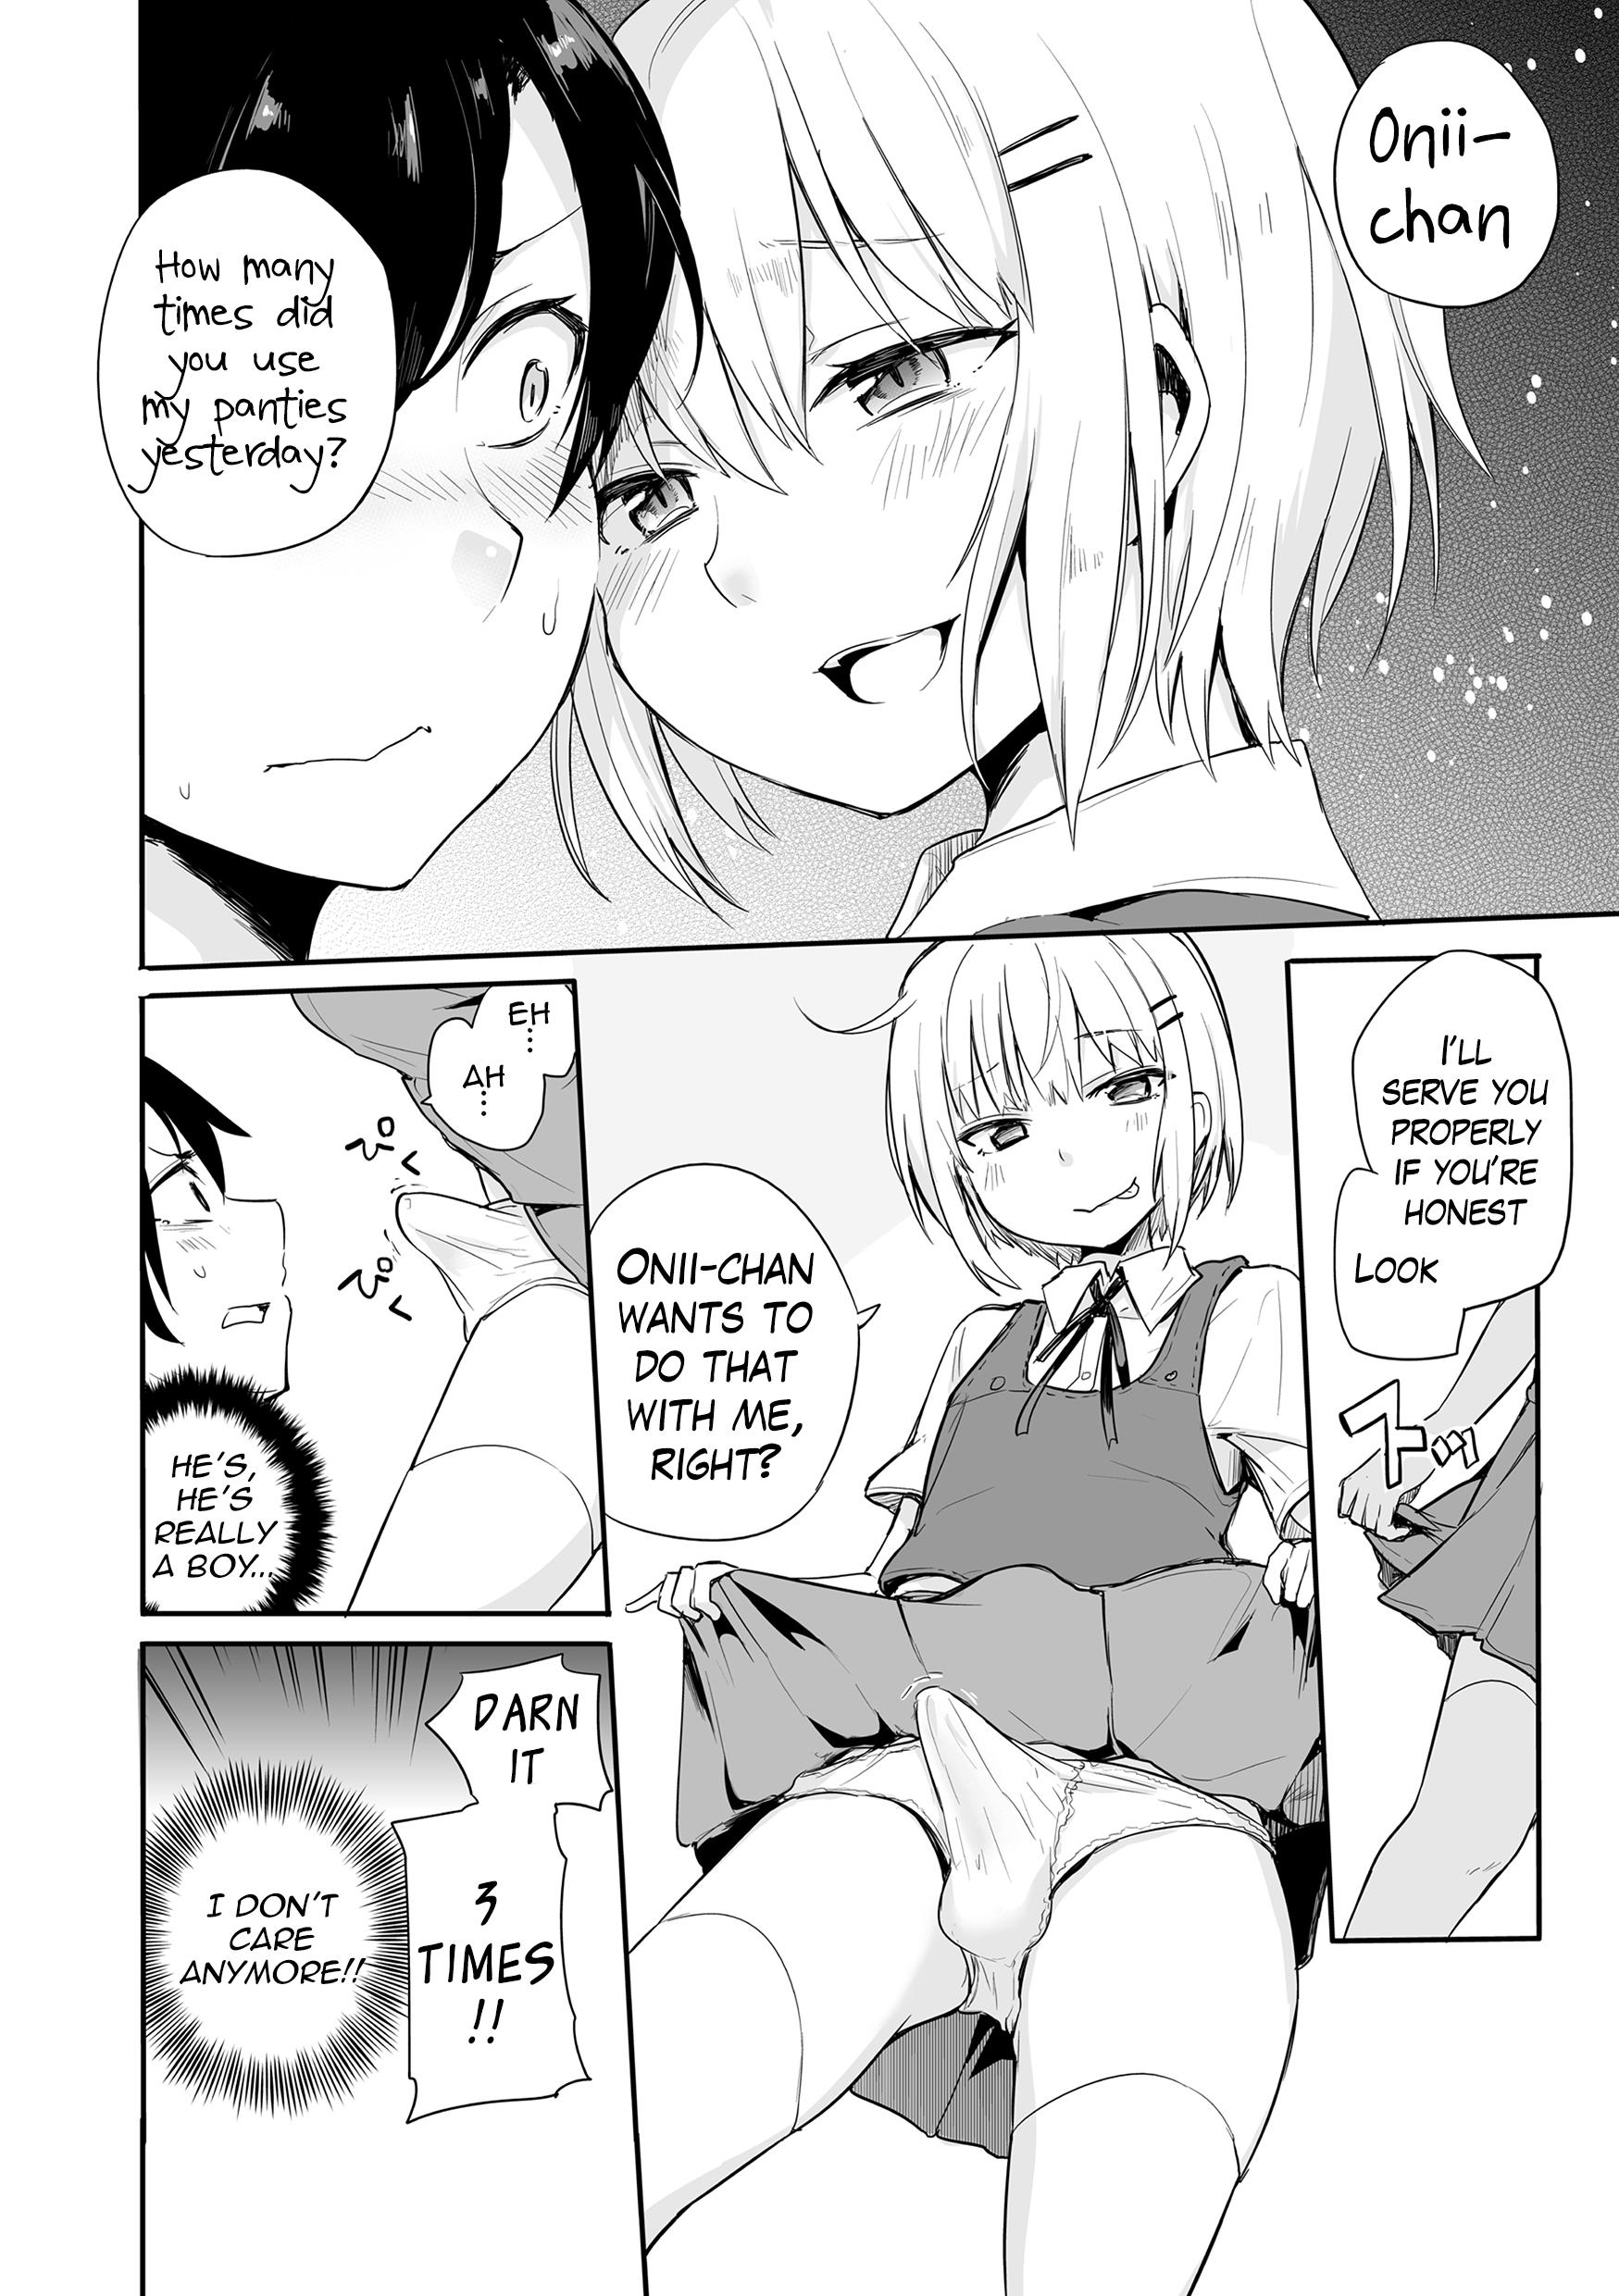 Firsttime Kono Joukyou de Otouto Route ga nai no wa Okashii! | This Situation is too Weird for it not to be a Little Brother’s Route! Gay 3some - Page 7